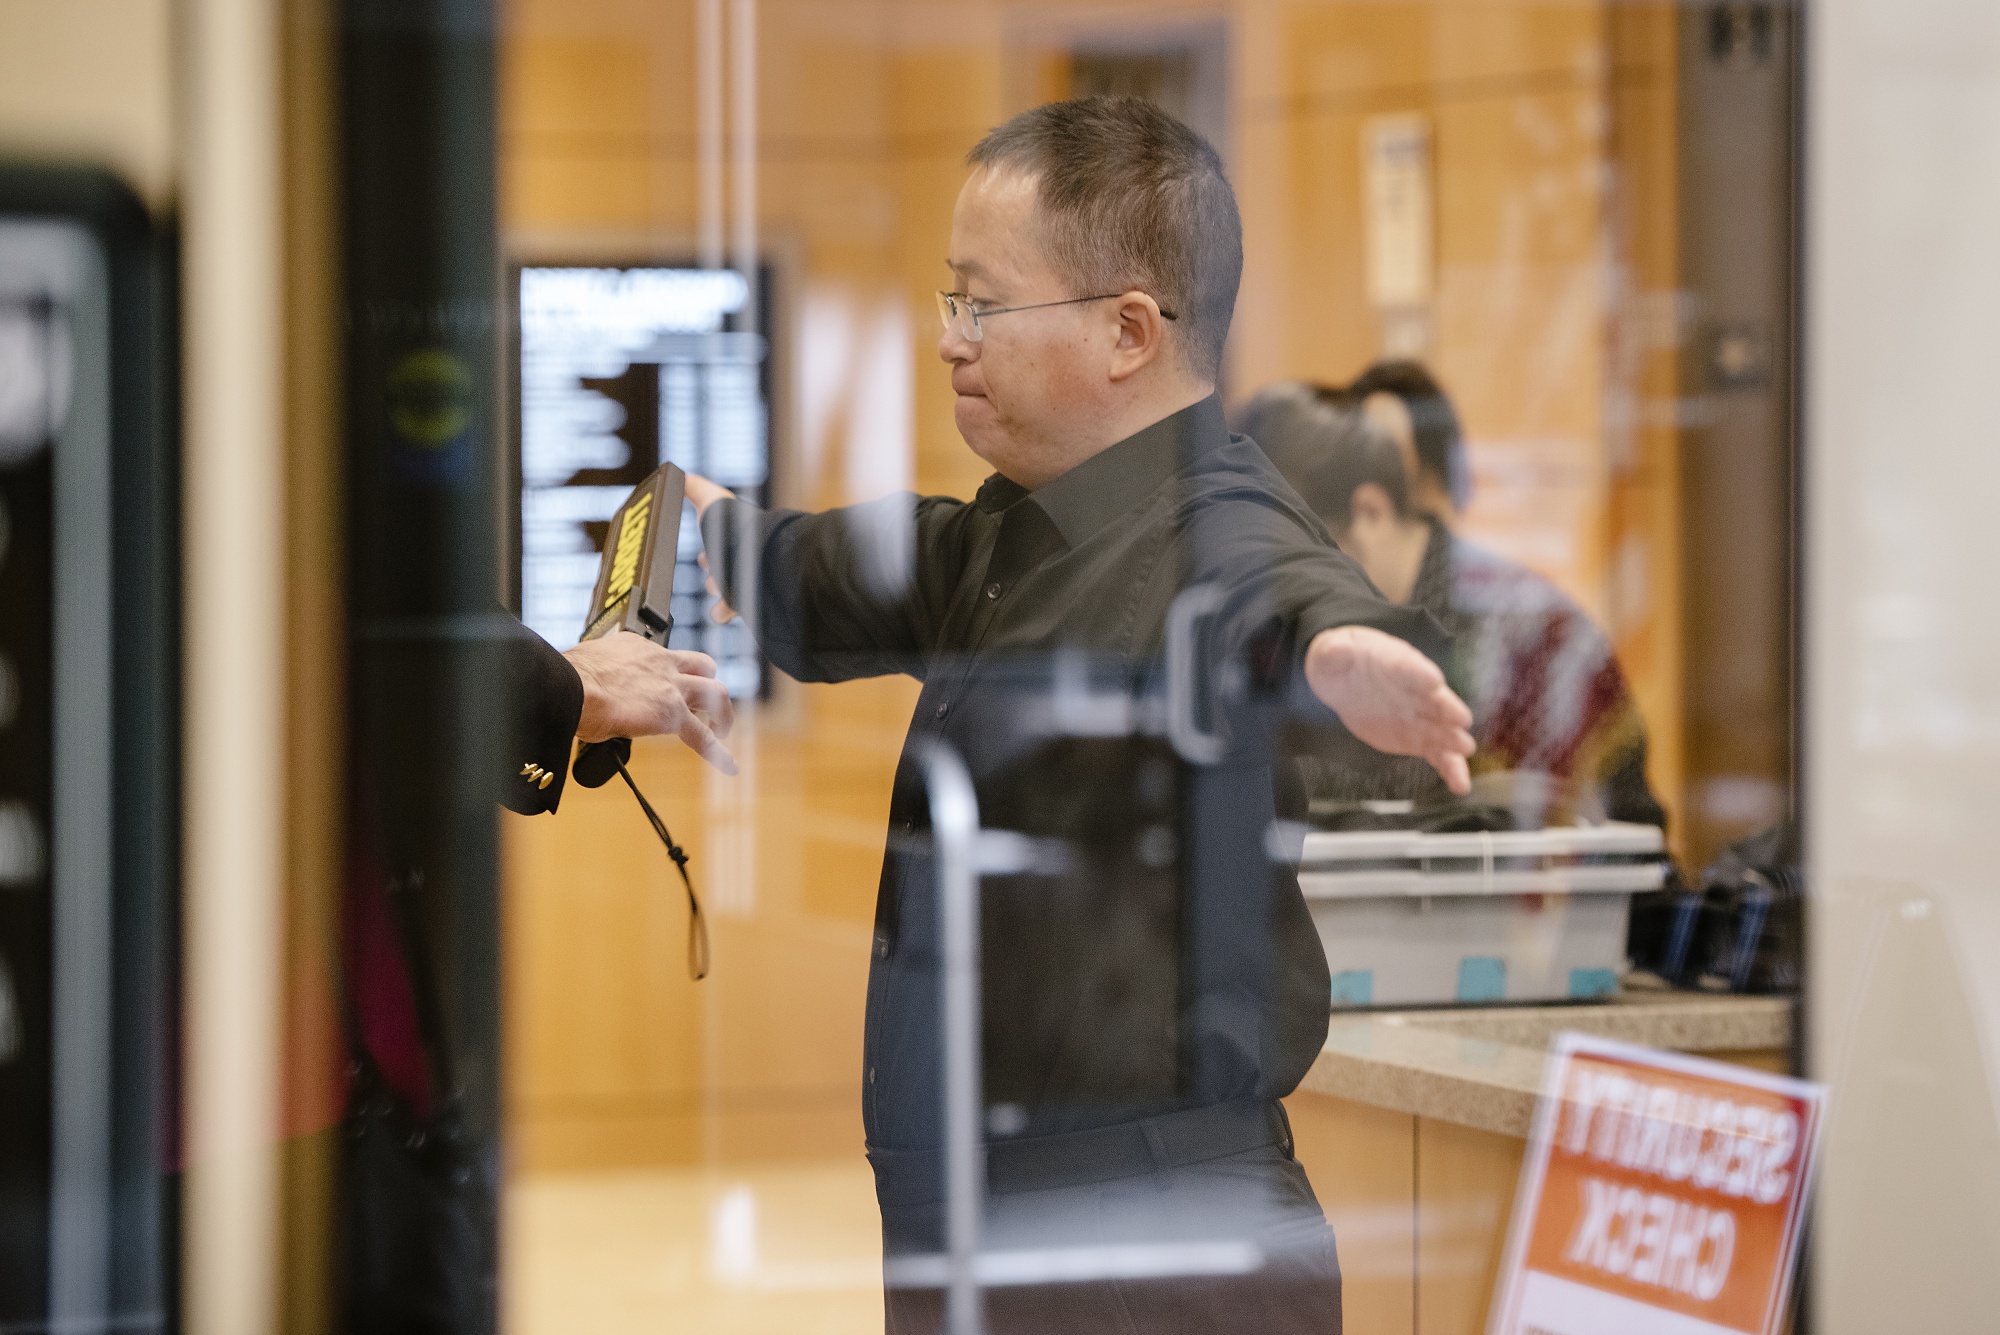 Hao Zhang, a professor at Tianjin University in China, goes through security while arriving at federal court in San Jose, California, on&nbsp;Oct. 2, 2019.